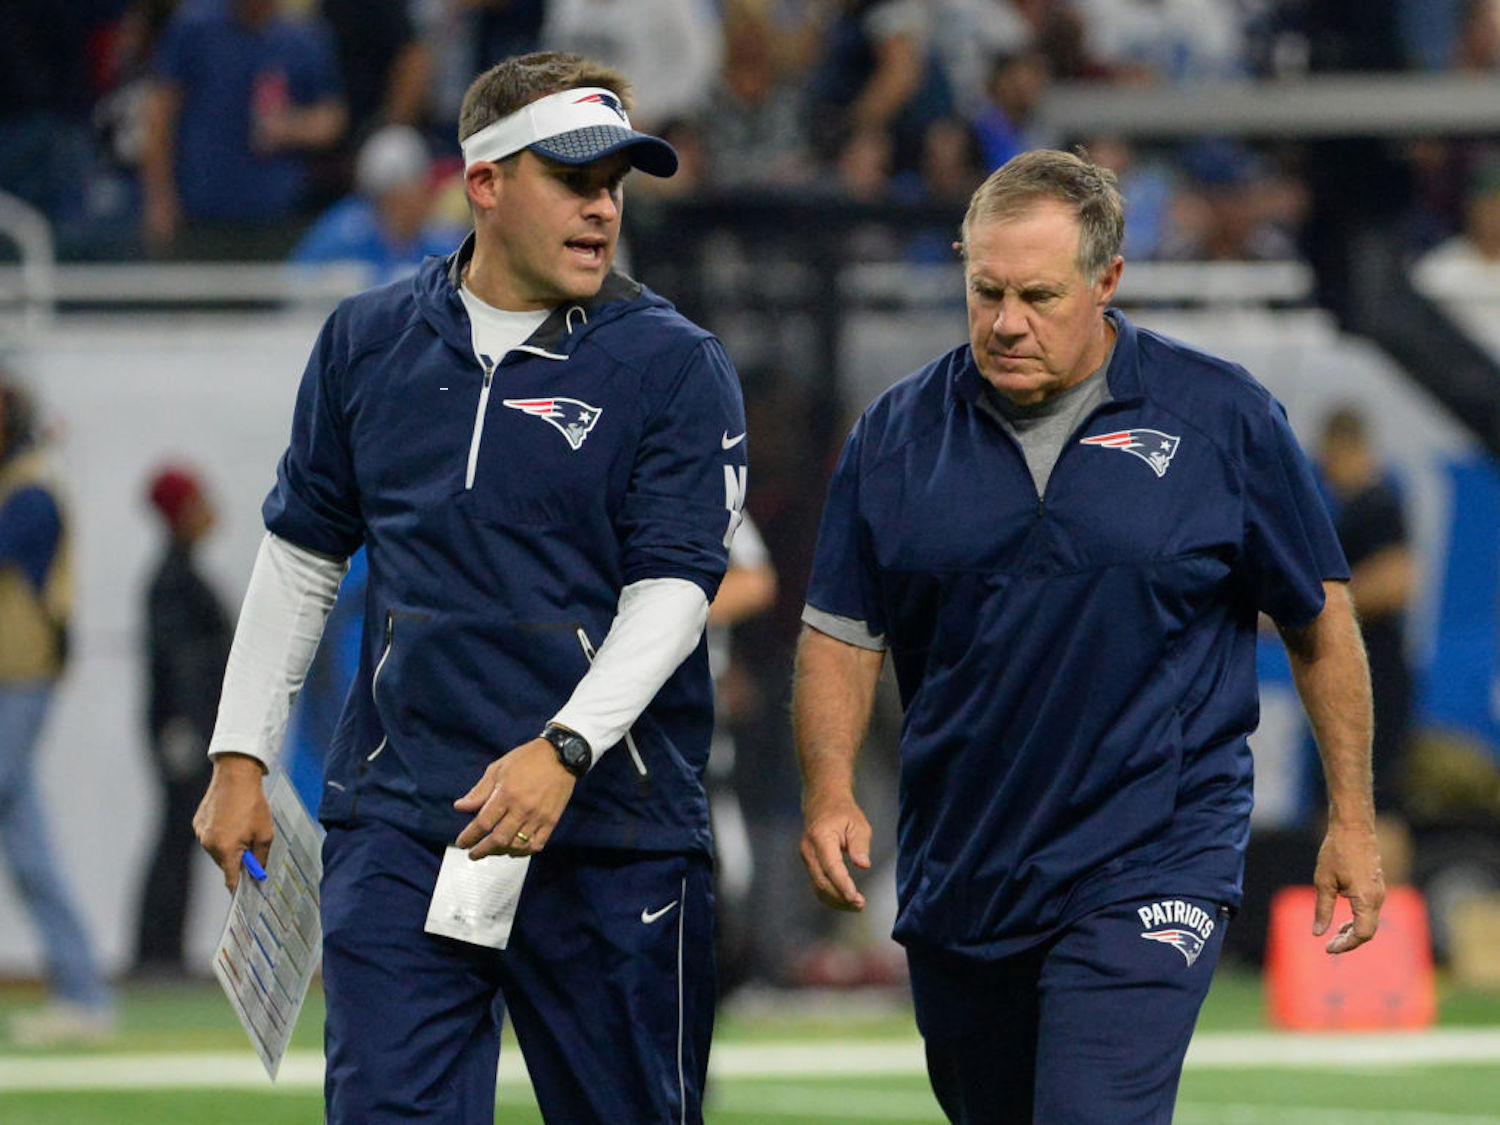 The New England Patriots have many issues plaguing their current offense, and one of them might soon be replacing OC Josh McDaniels.